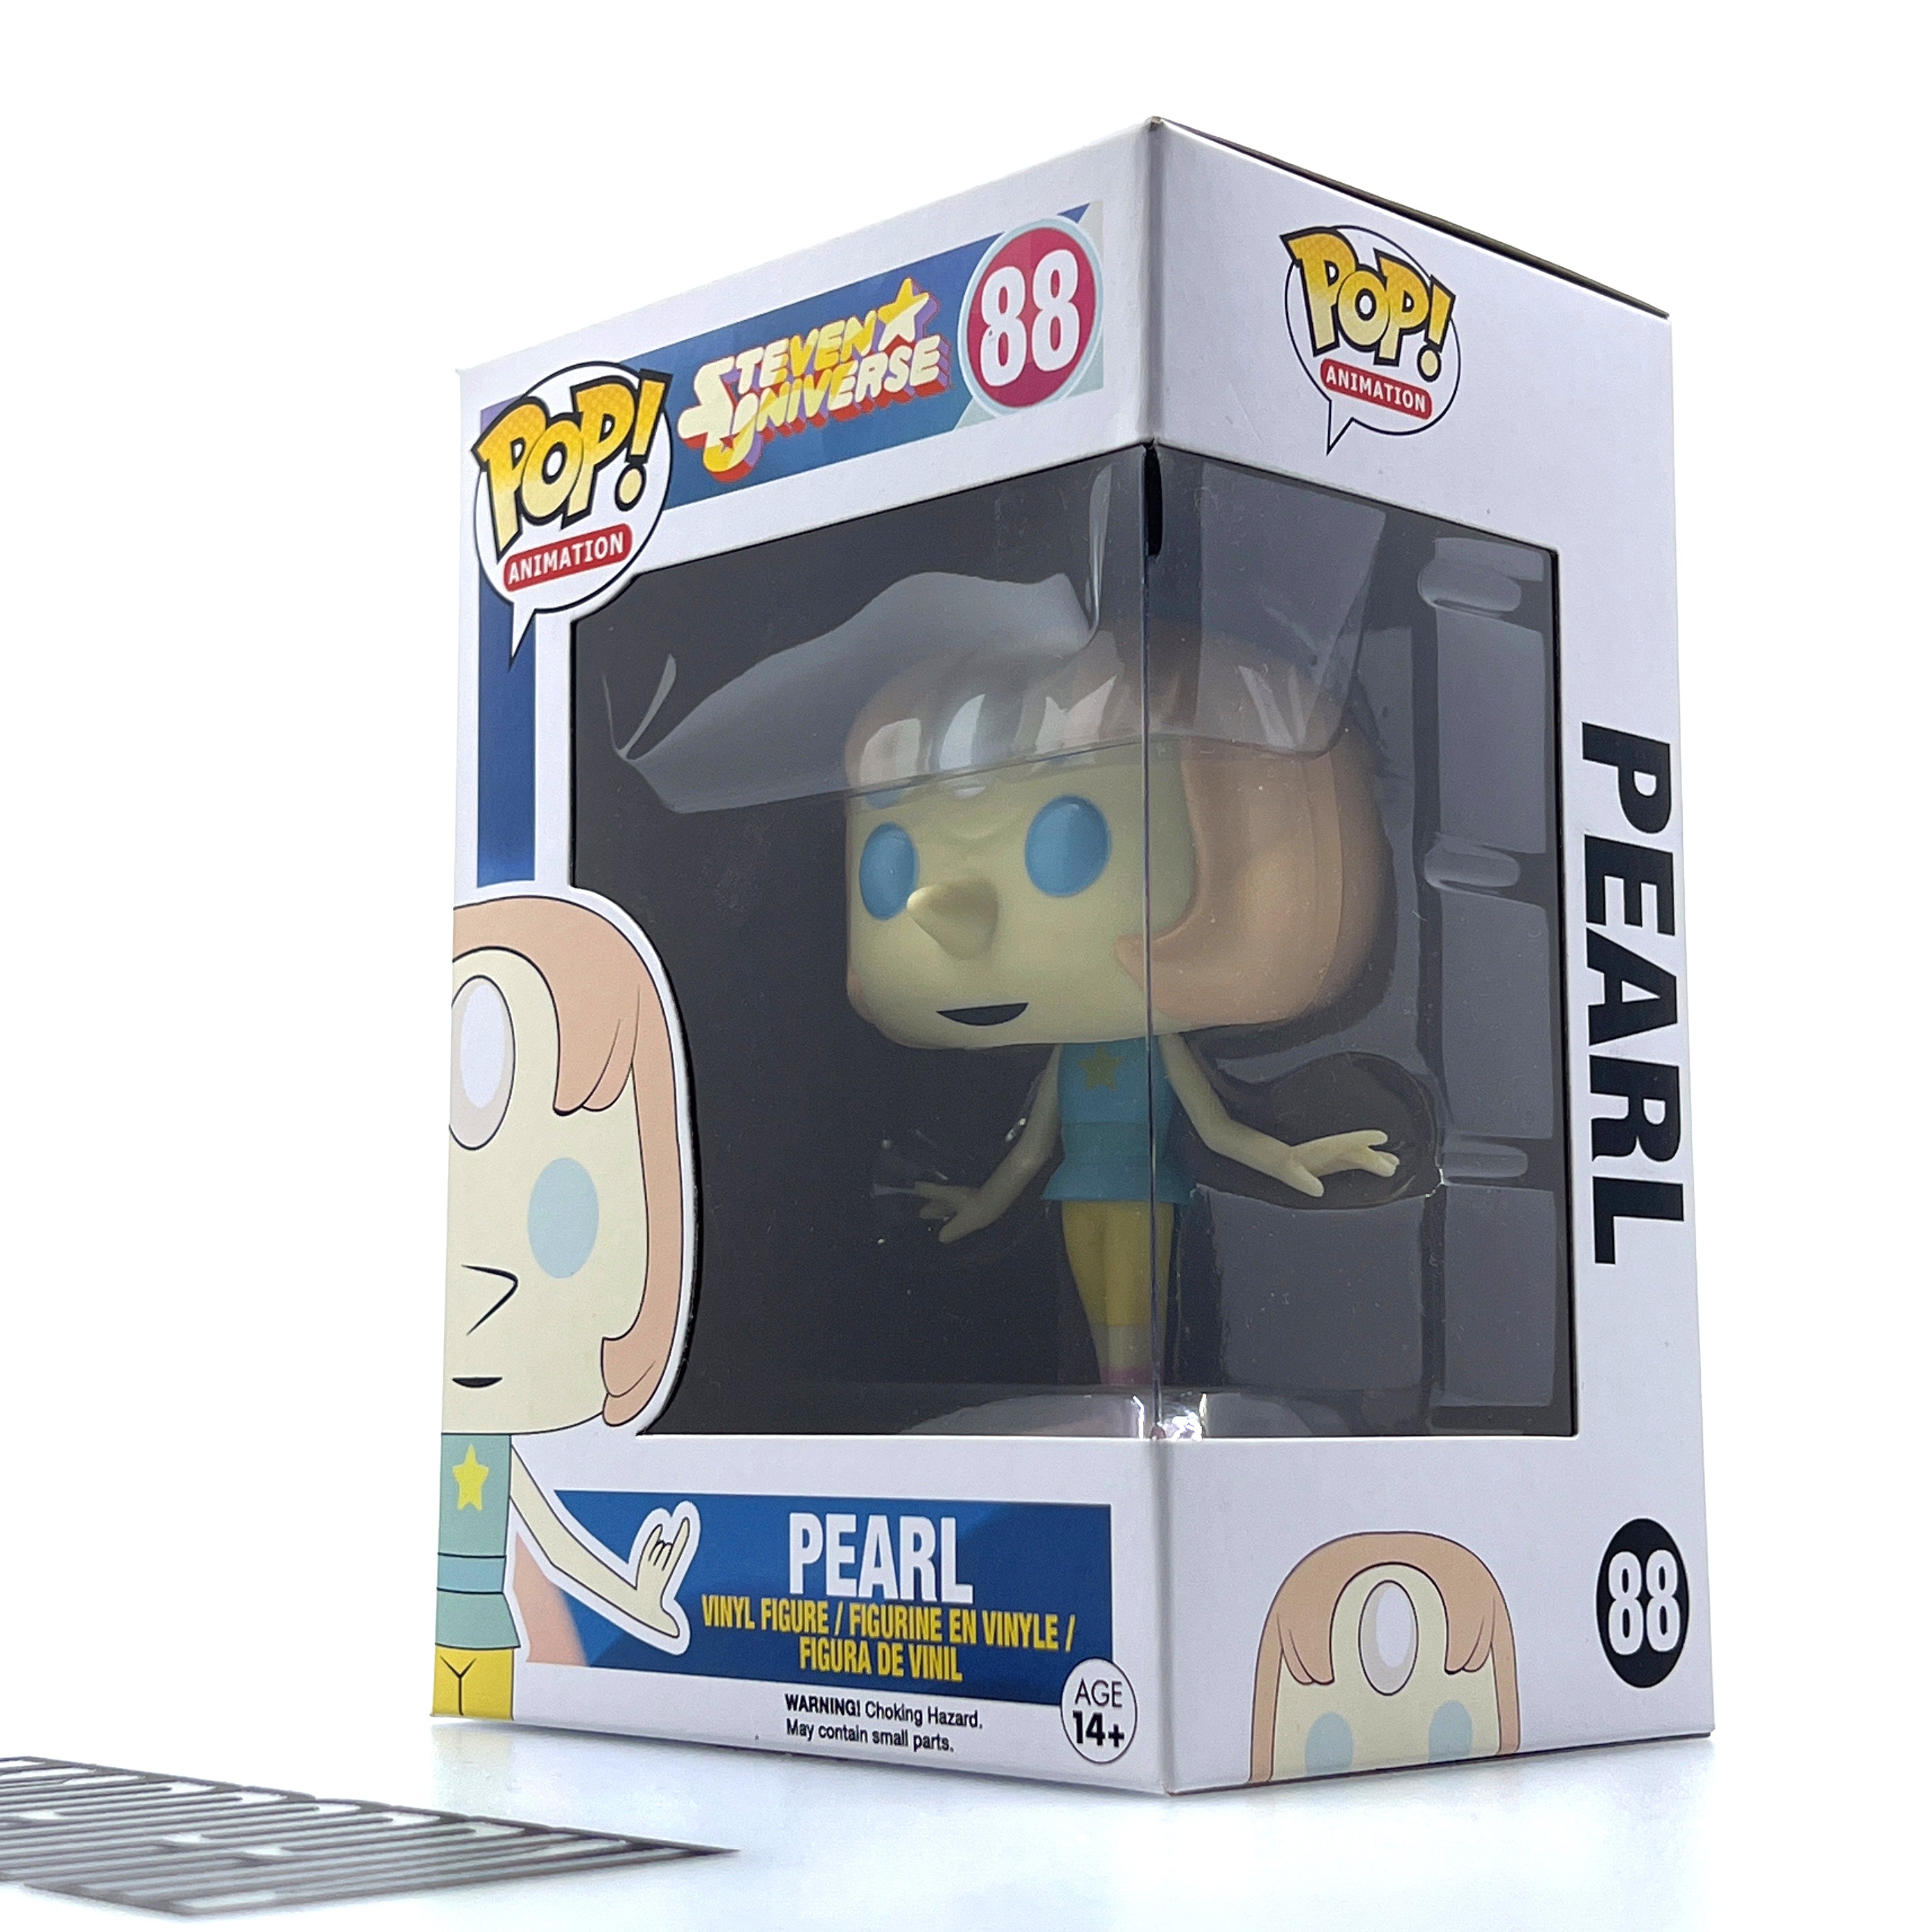 Funko Pop Animation Steven Universe Pearl Vaulted 88